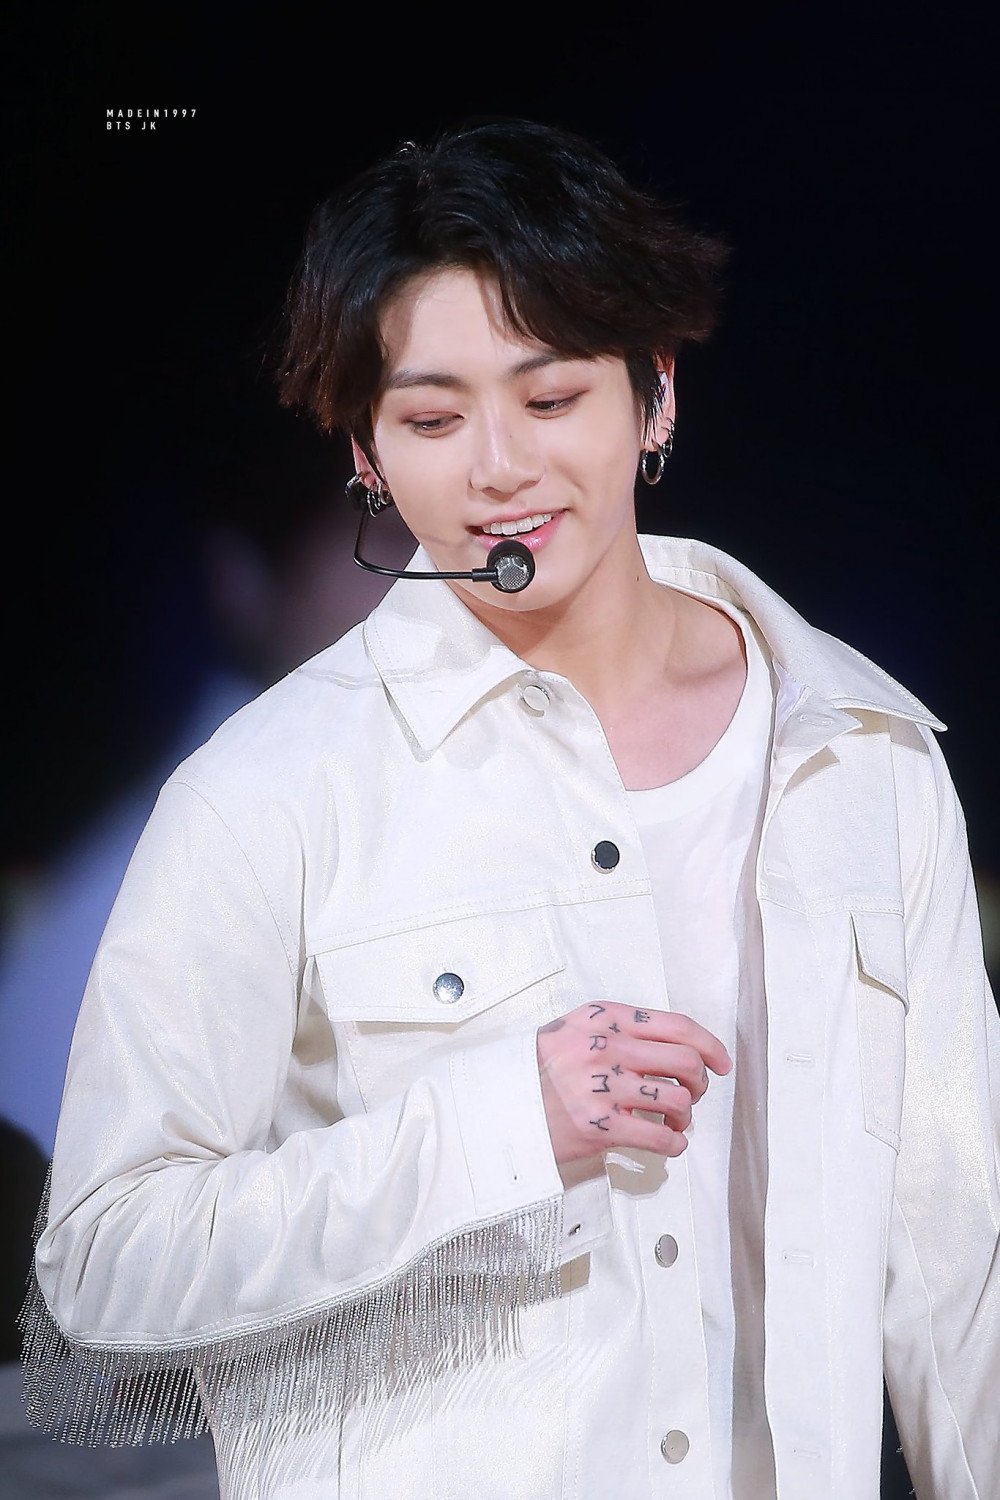 Trendsetter Jungkook strikes again; German media reports the idol's tattoos  are the most searched for tattoo inspiration on Pinterest | allkpop